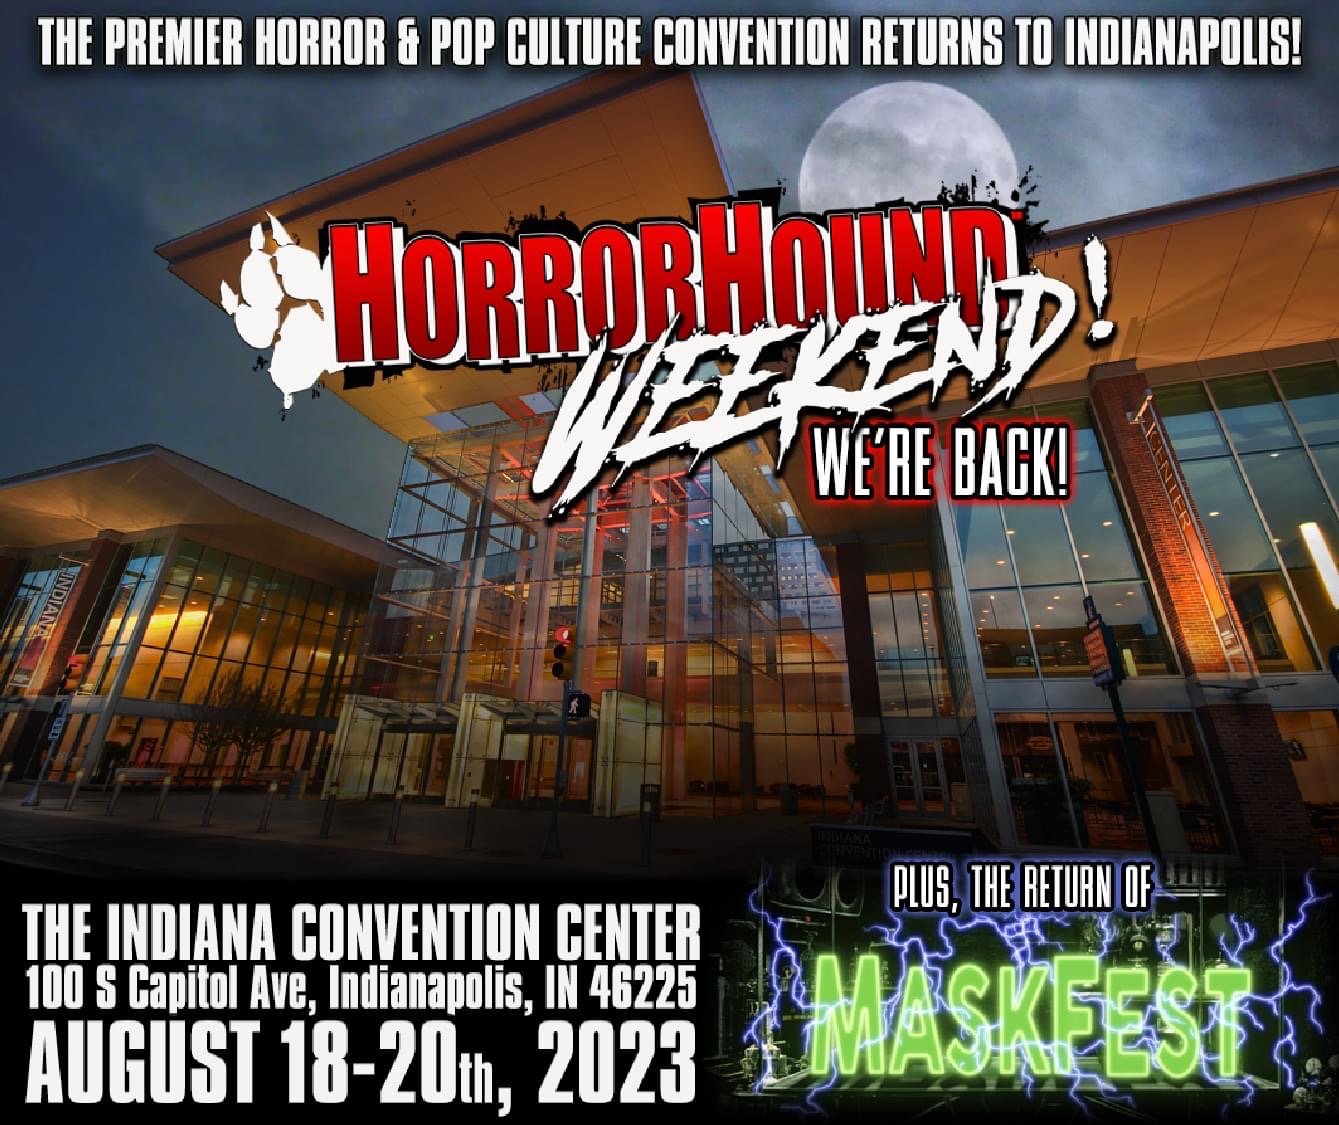 HorrorHound Weekend Indiana Convention Center Indianapolis, IN